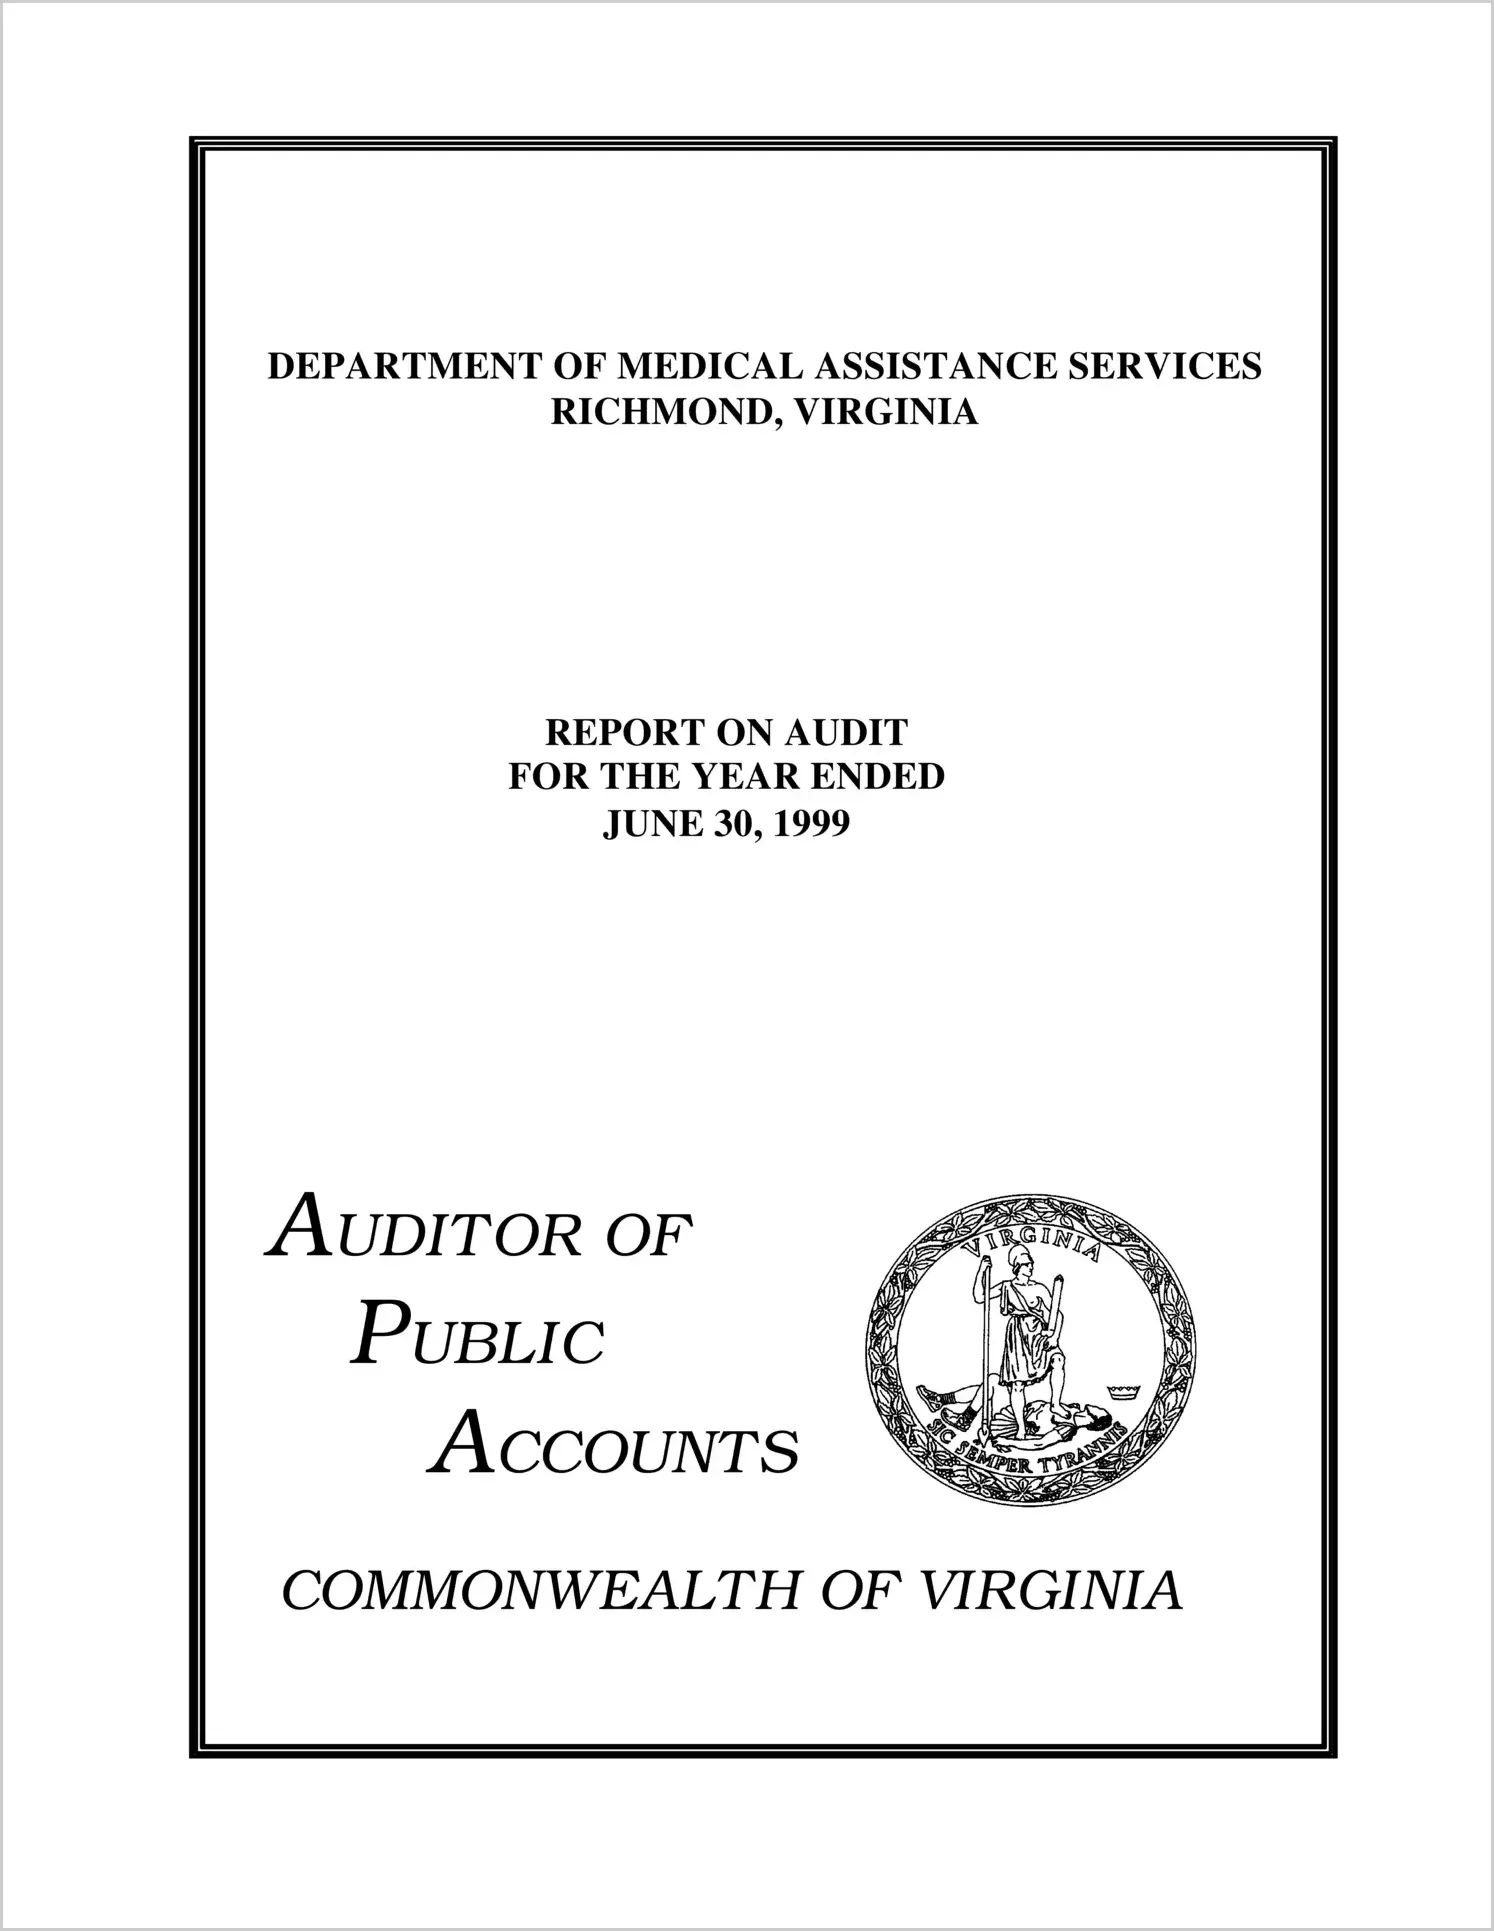 Department of Medical Assistance Services for the year ended June 30, 1999